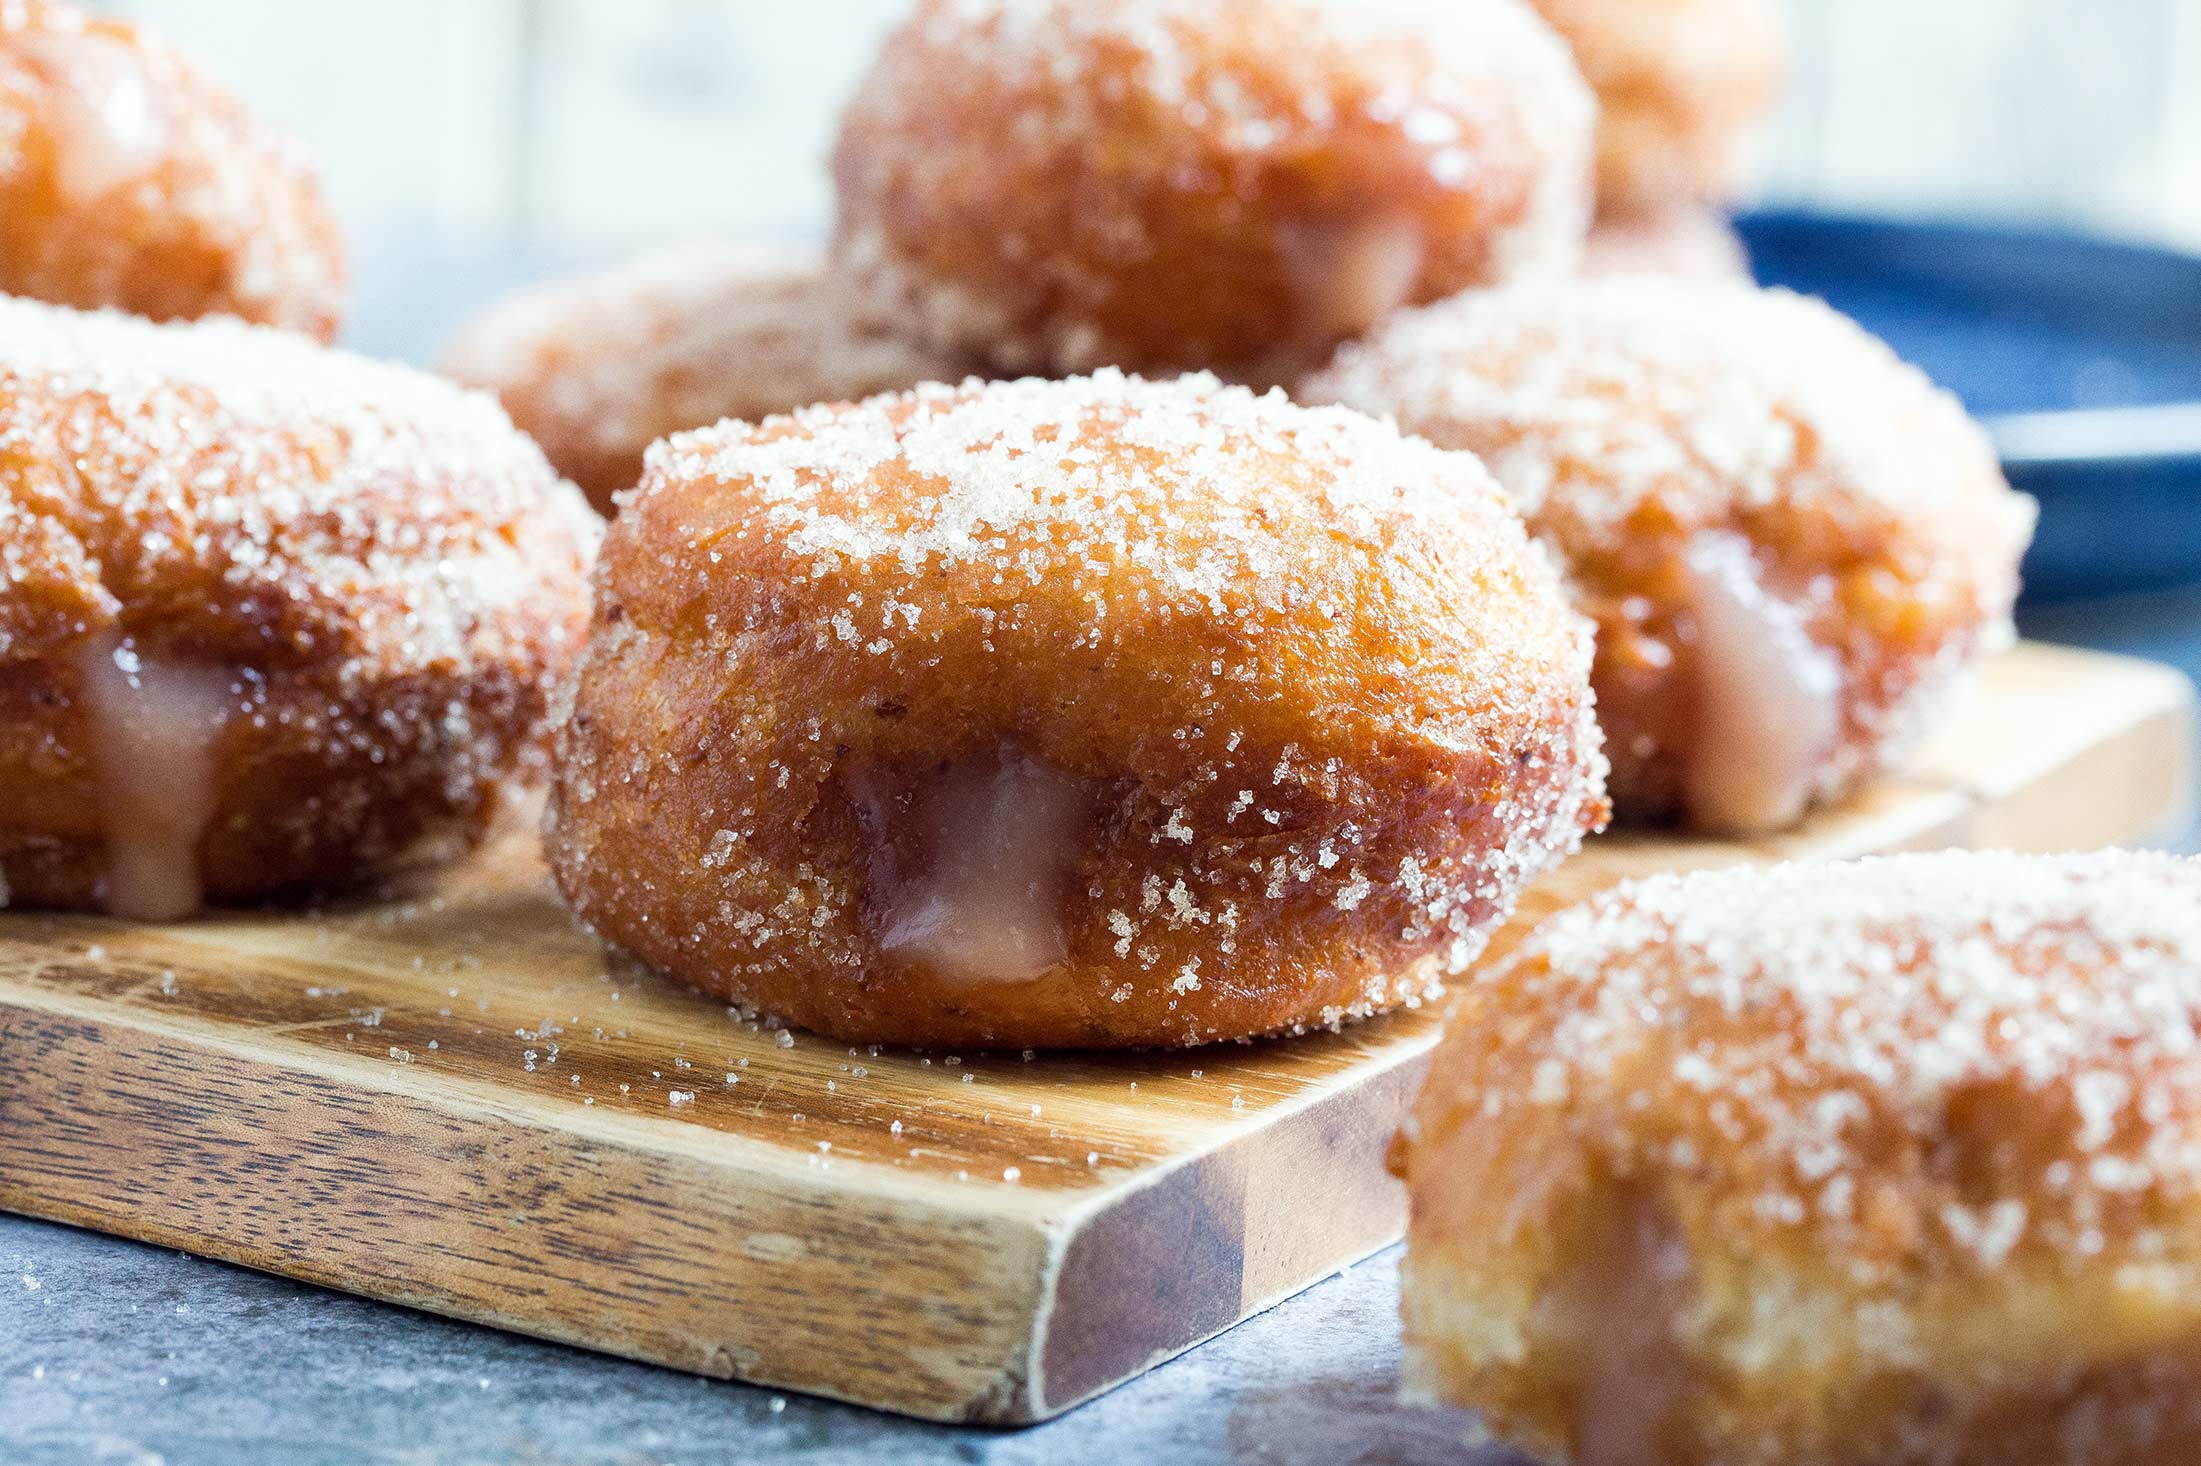 Doughnuts with Grapefruit curd